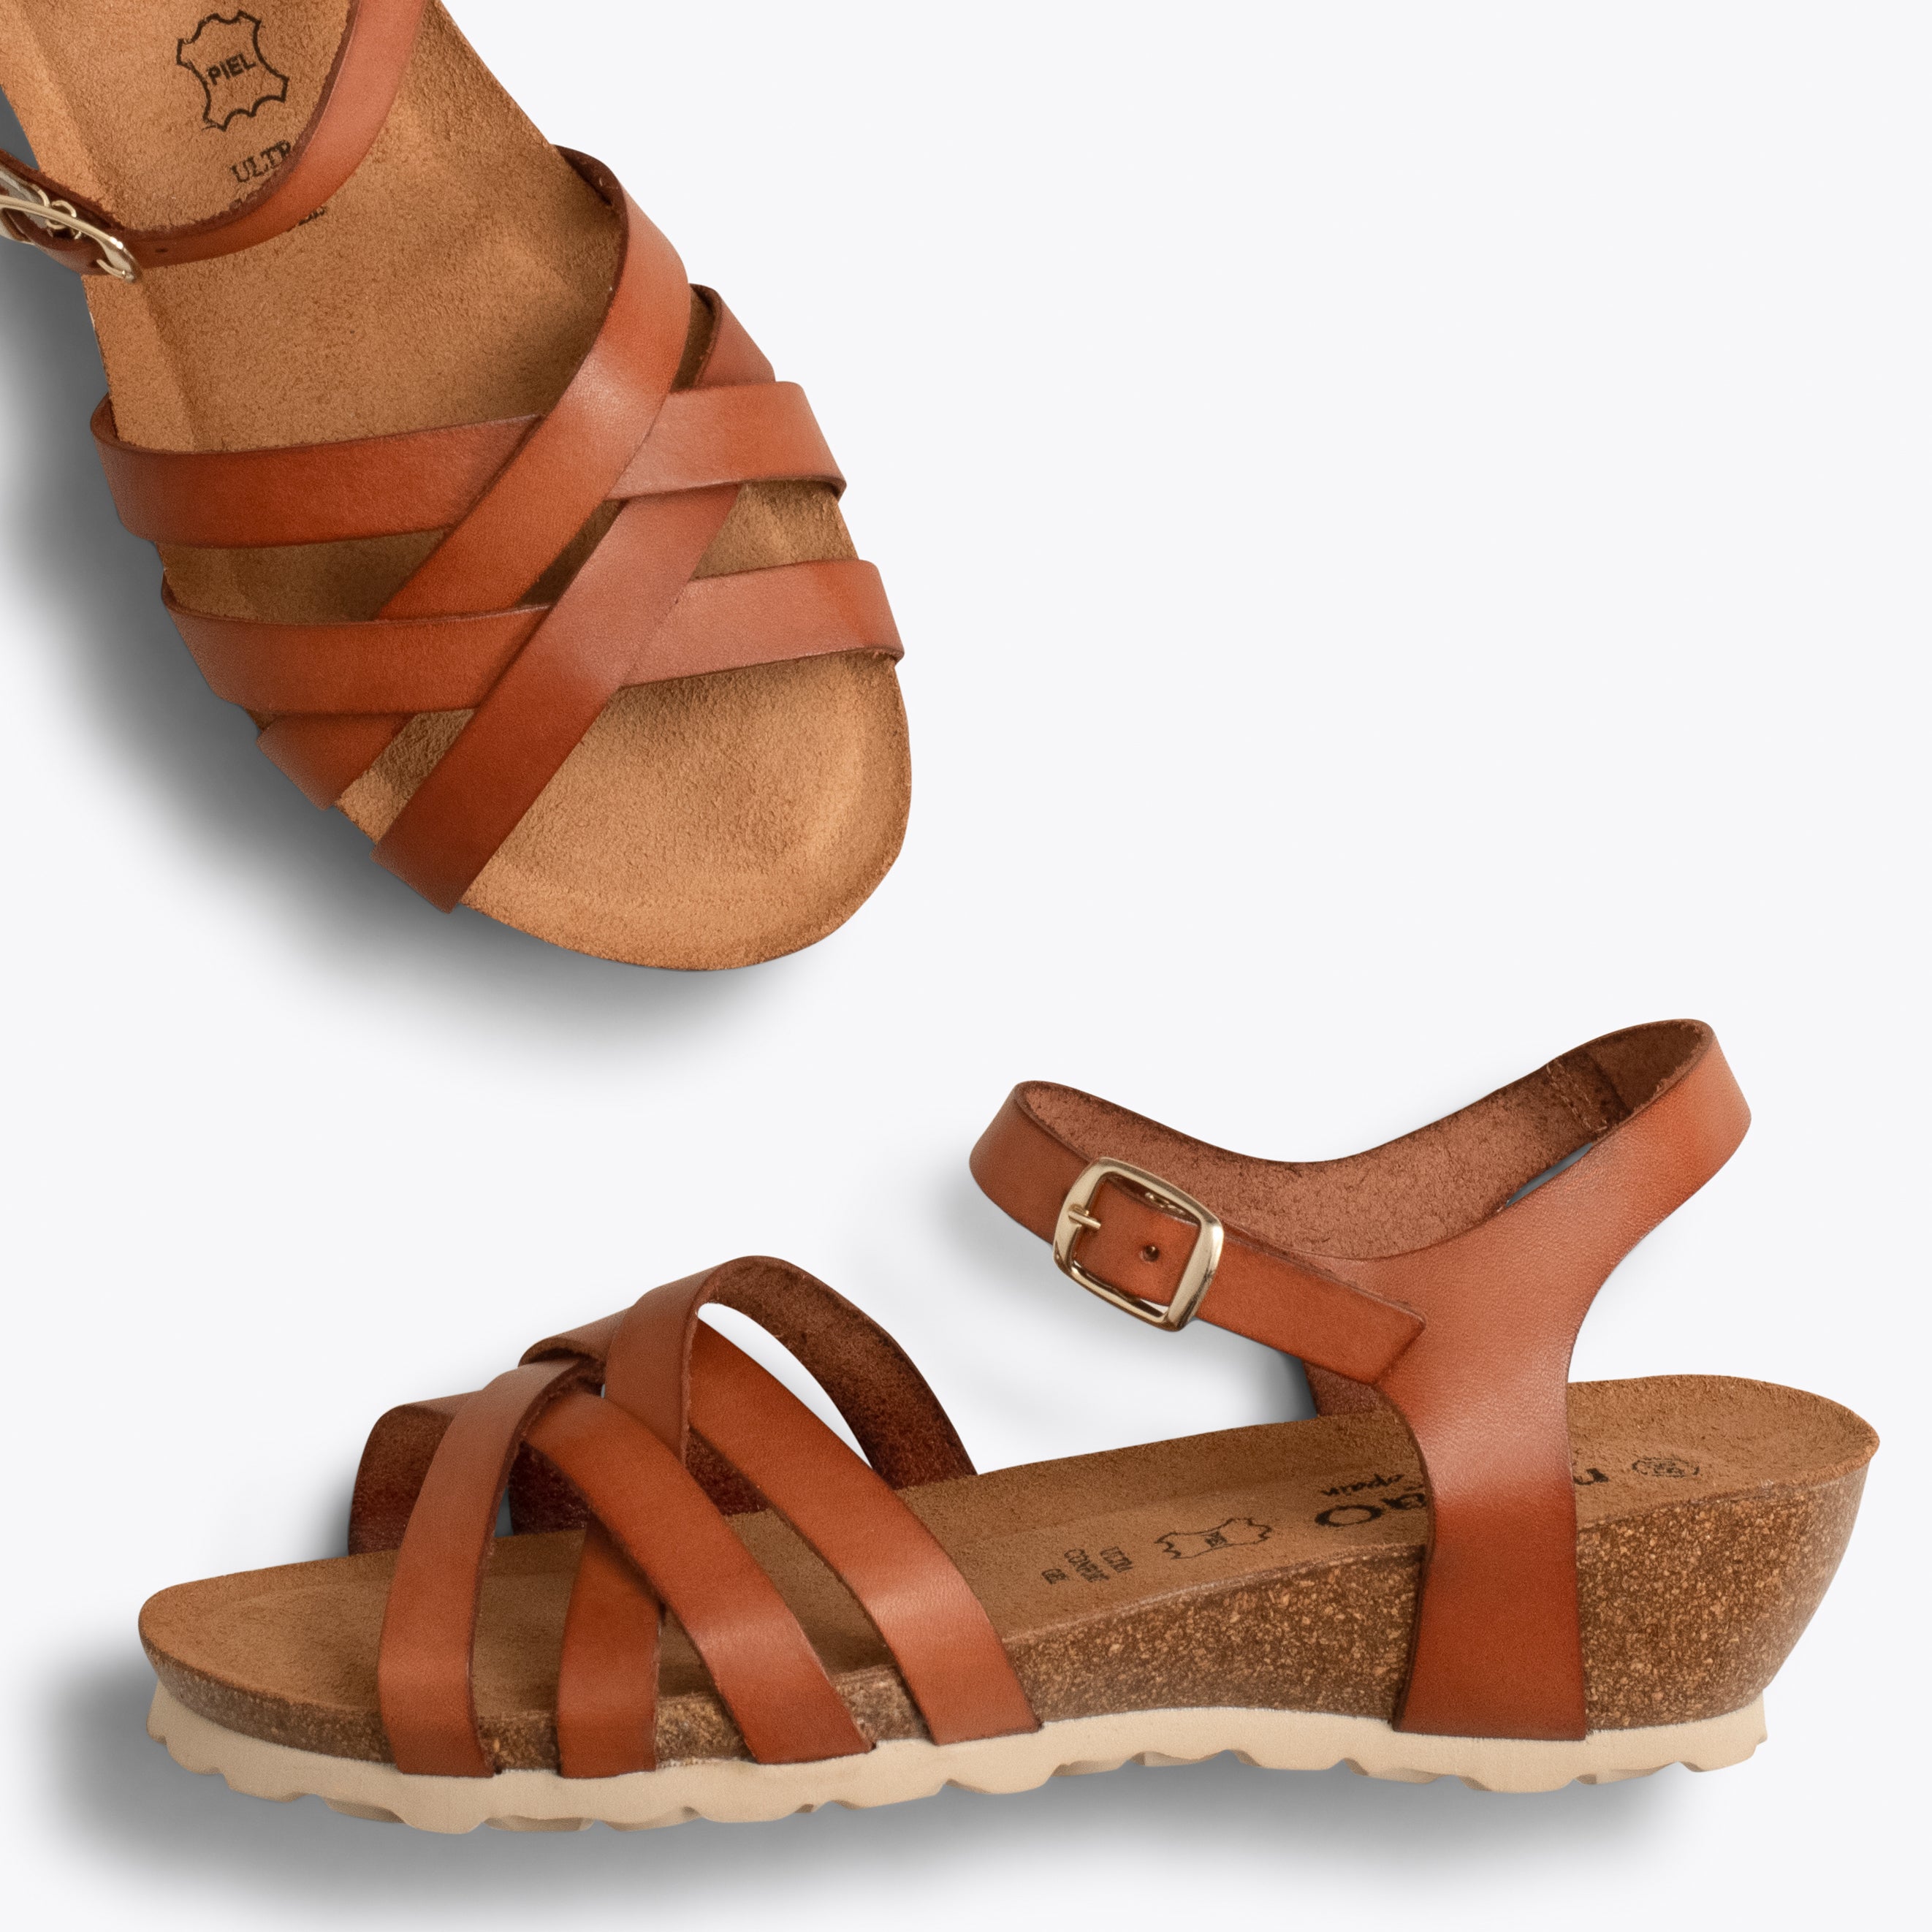 SOFT – CAMEL sandals with BIO wedge